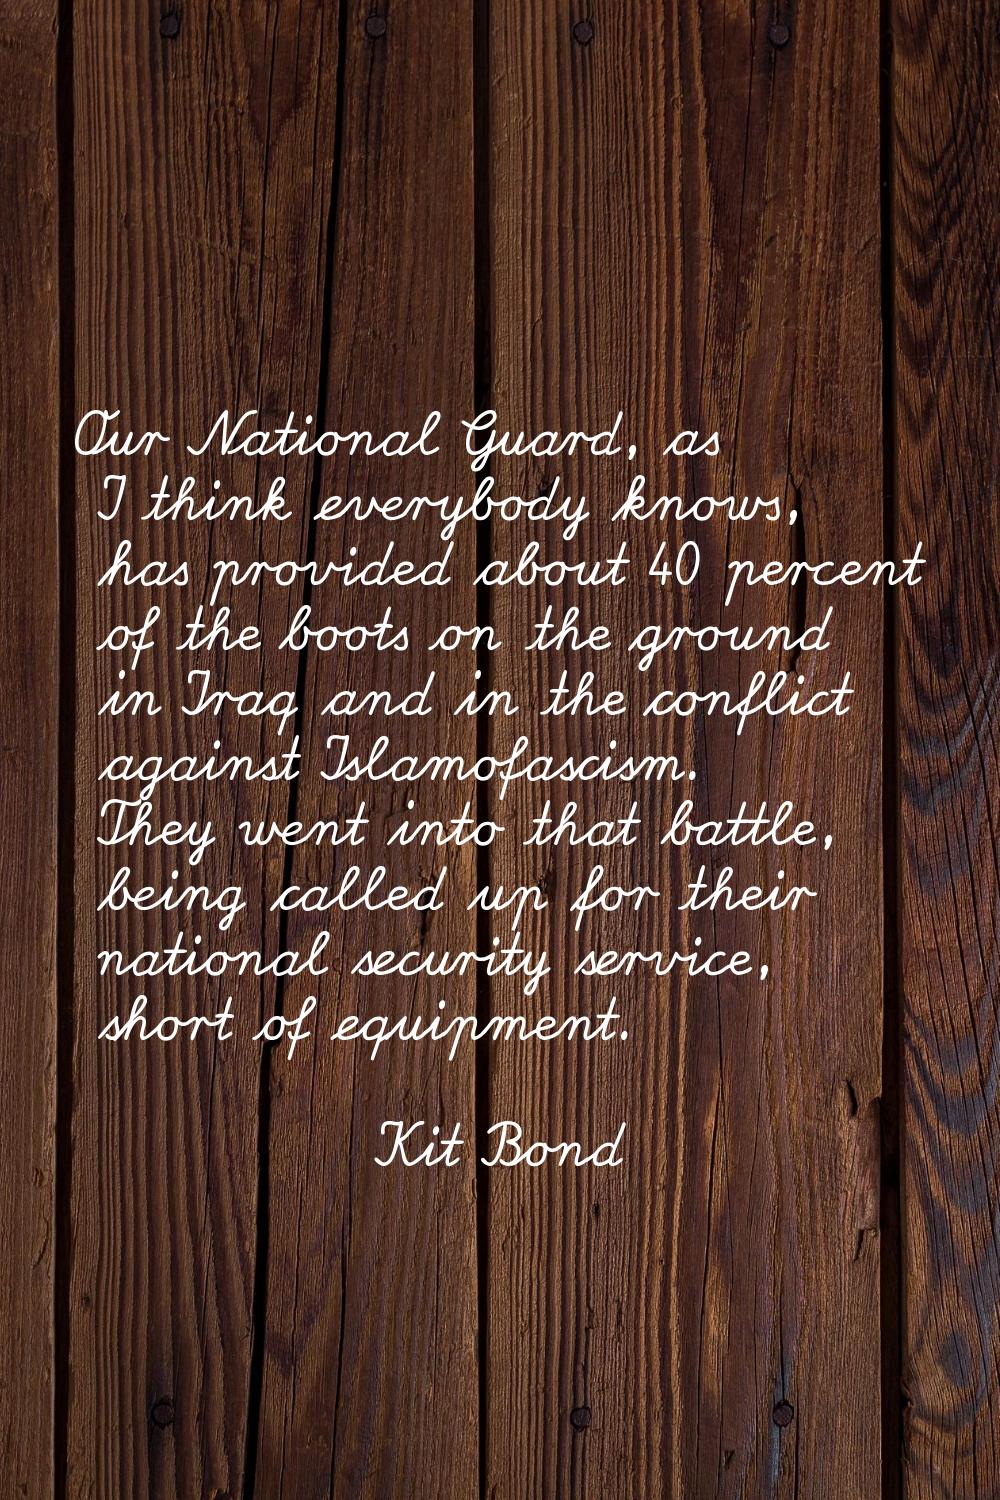 Our National Guard, as I think everybody knows, has provided about 40 percent of the boots on the g